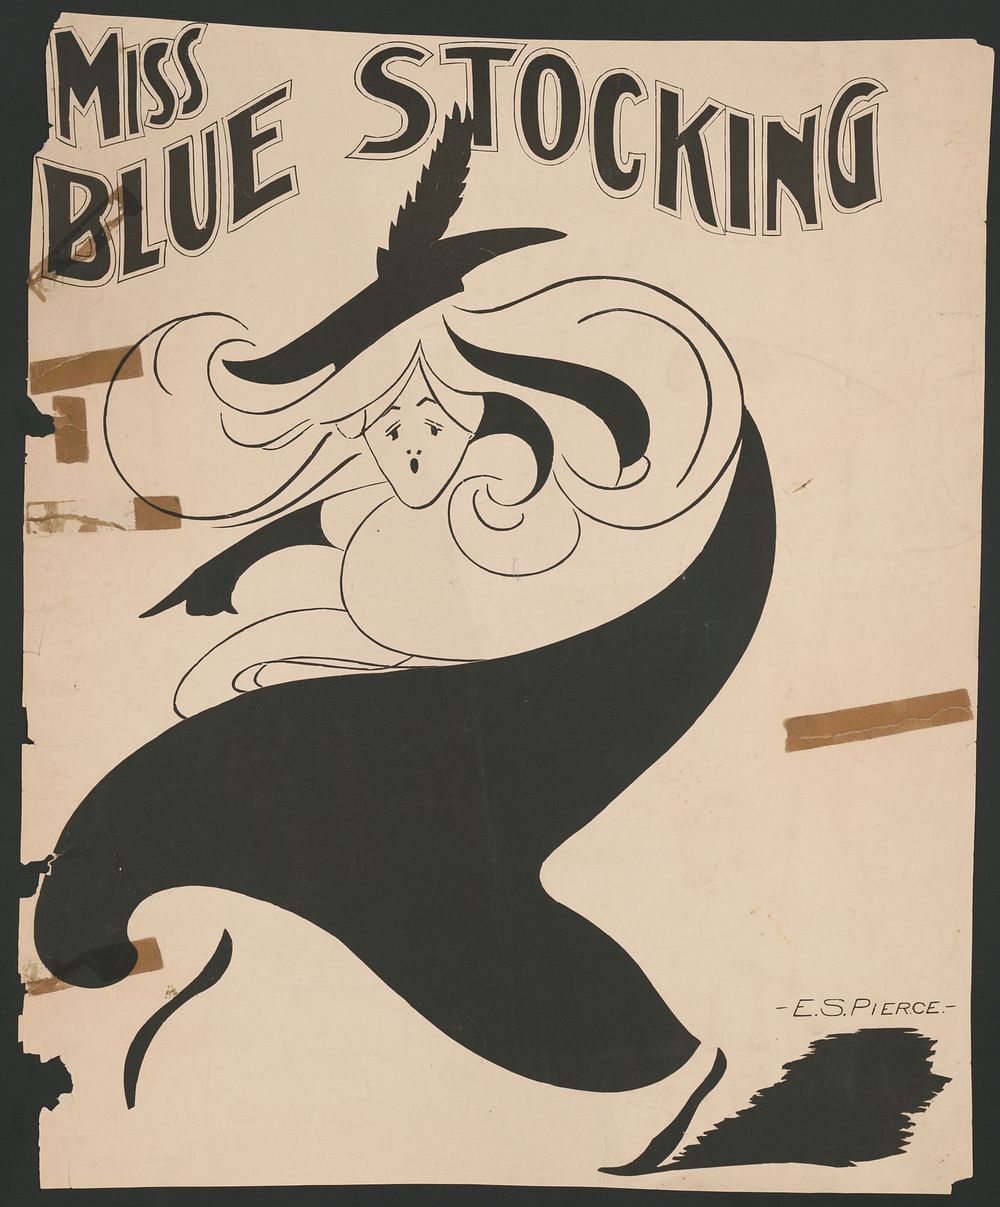 Miss Blue Stocking (1890) art noveau poster. Original public domain image from the Library of Congress.